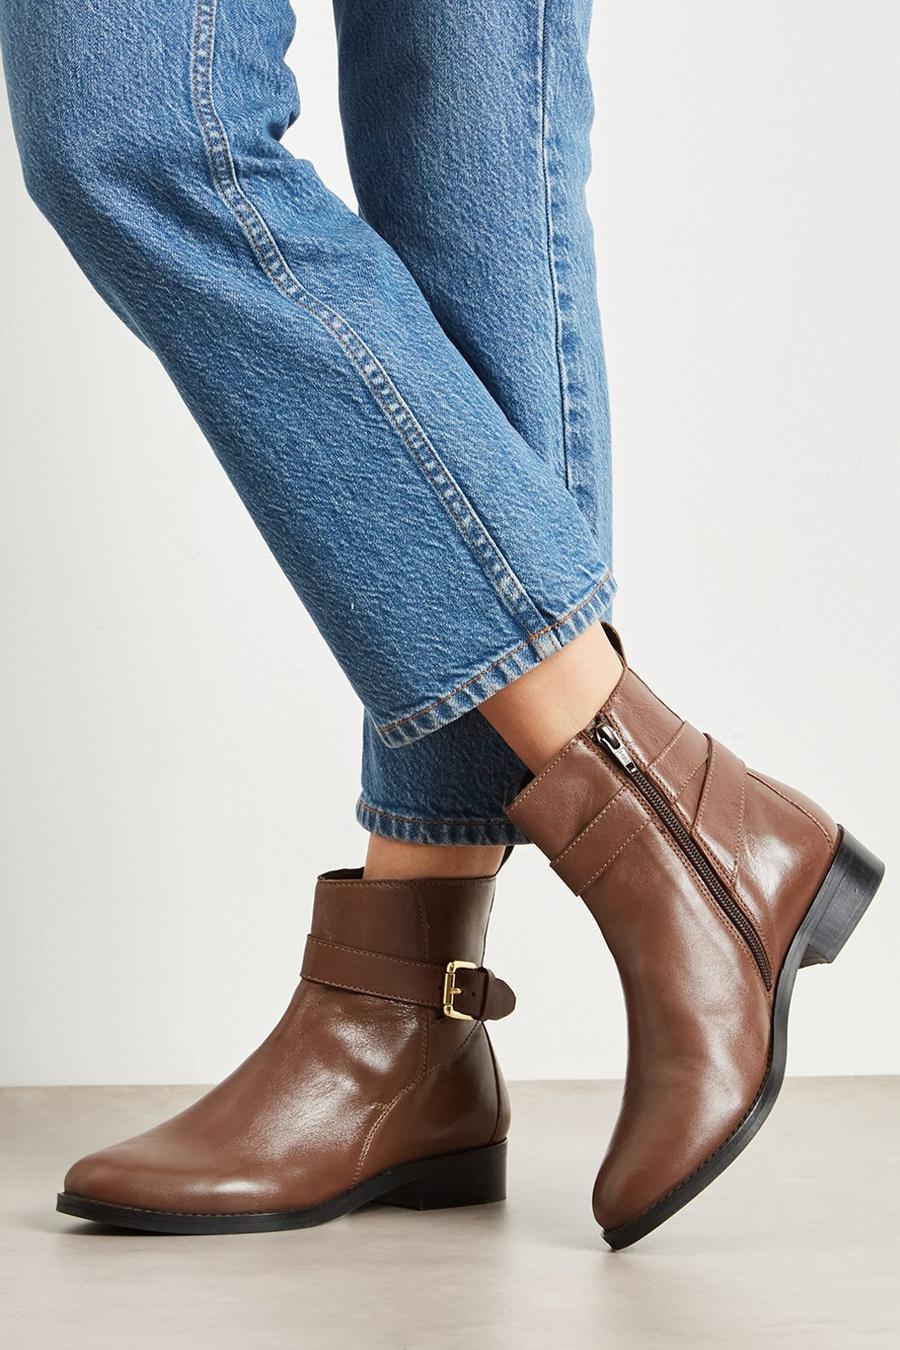 Principles: October Leather Buckle Ankle Boot